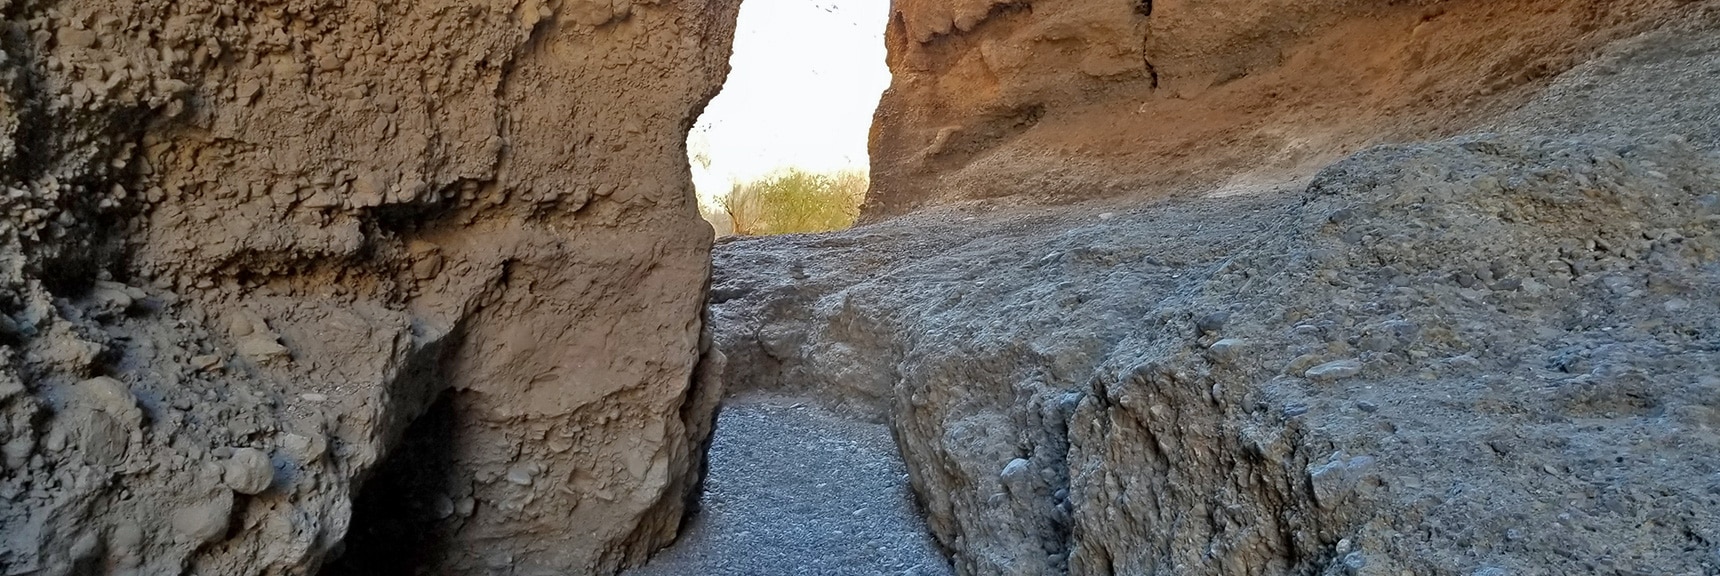 Approaching the Upper End of the Slot Canyon | Harris Springs Canyon | Biking from Centennial Hills | Spring Mountains, Nevada